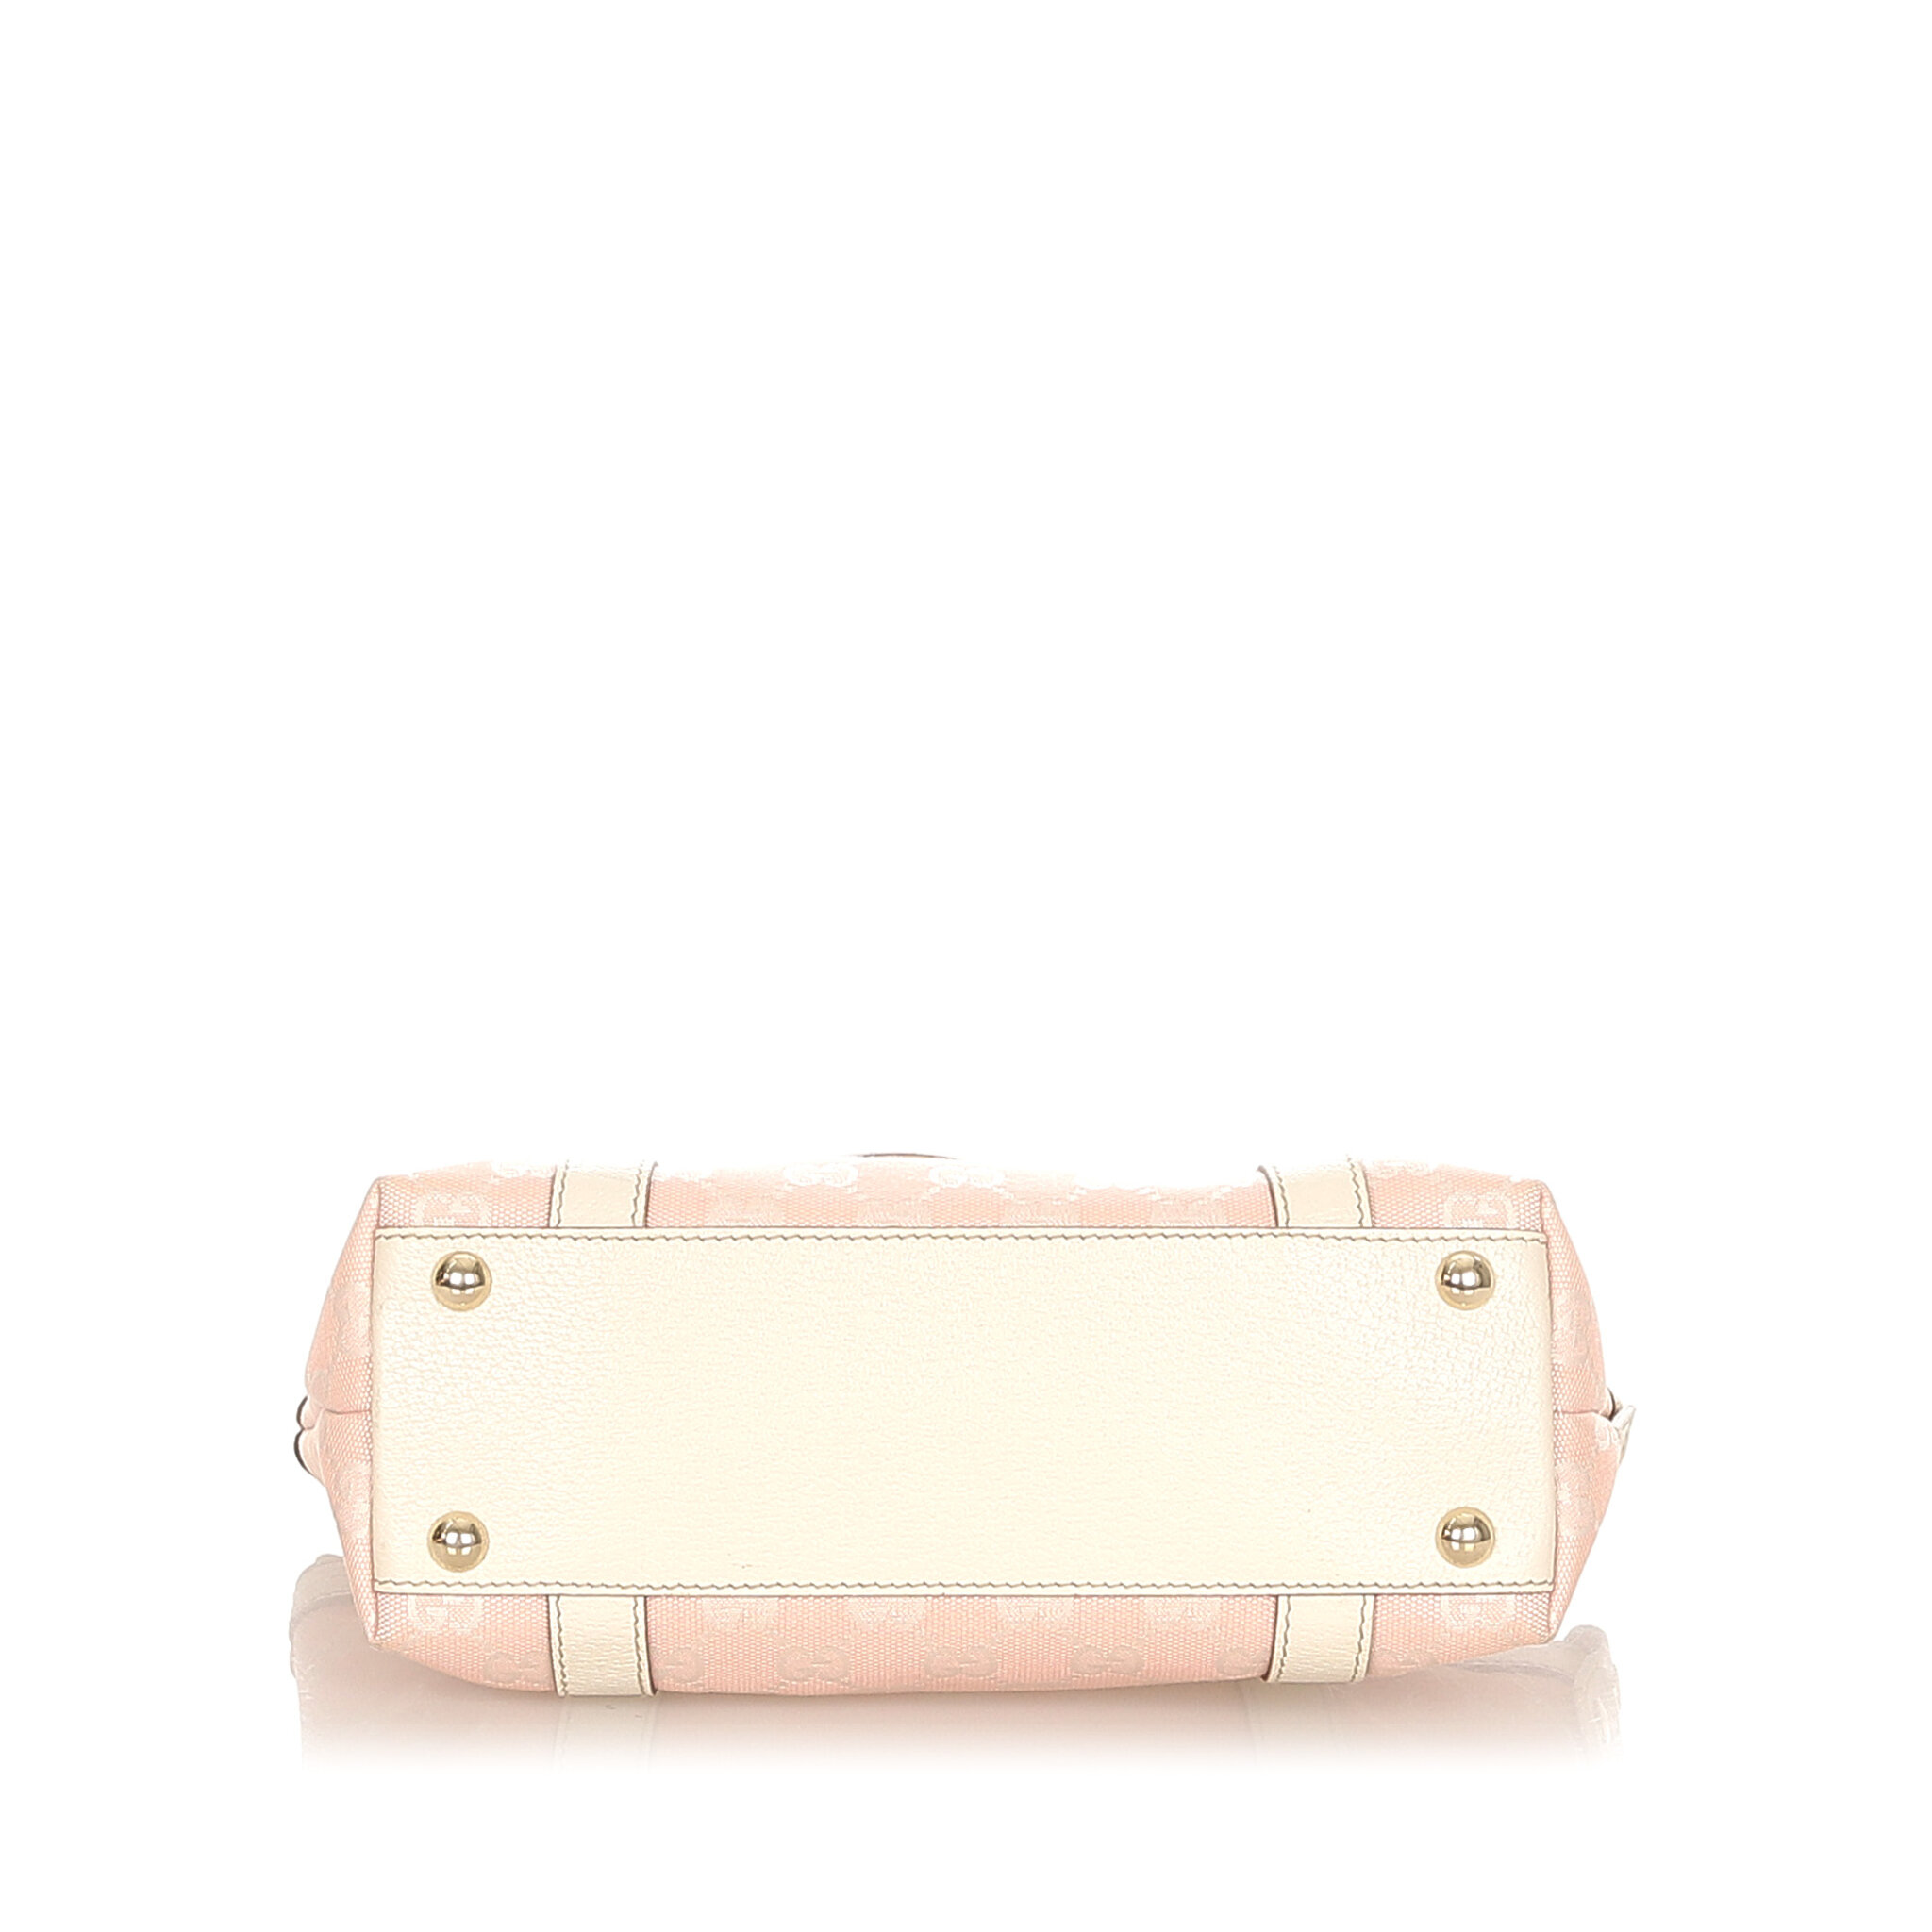 Gucci Gg Canvas Abbey Tote Bag, pink